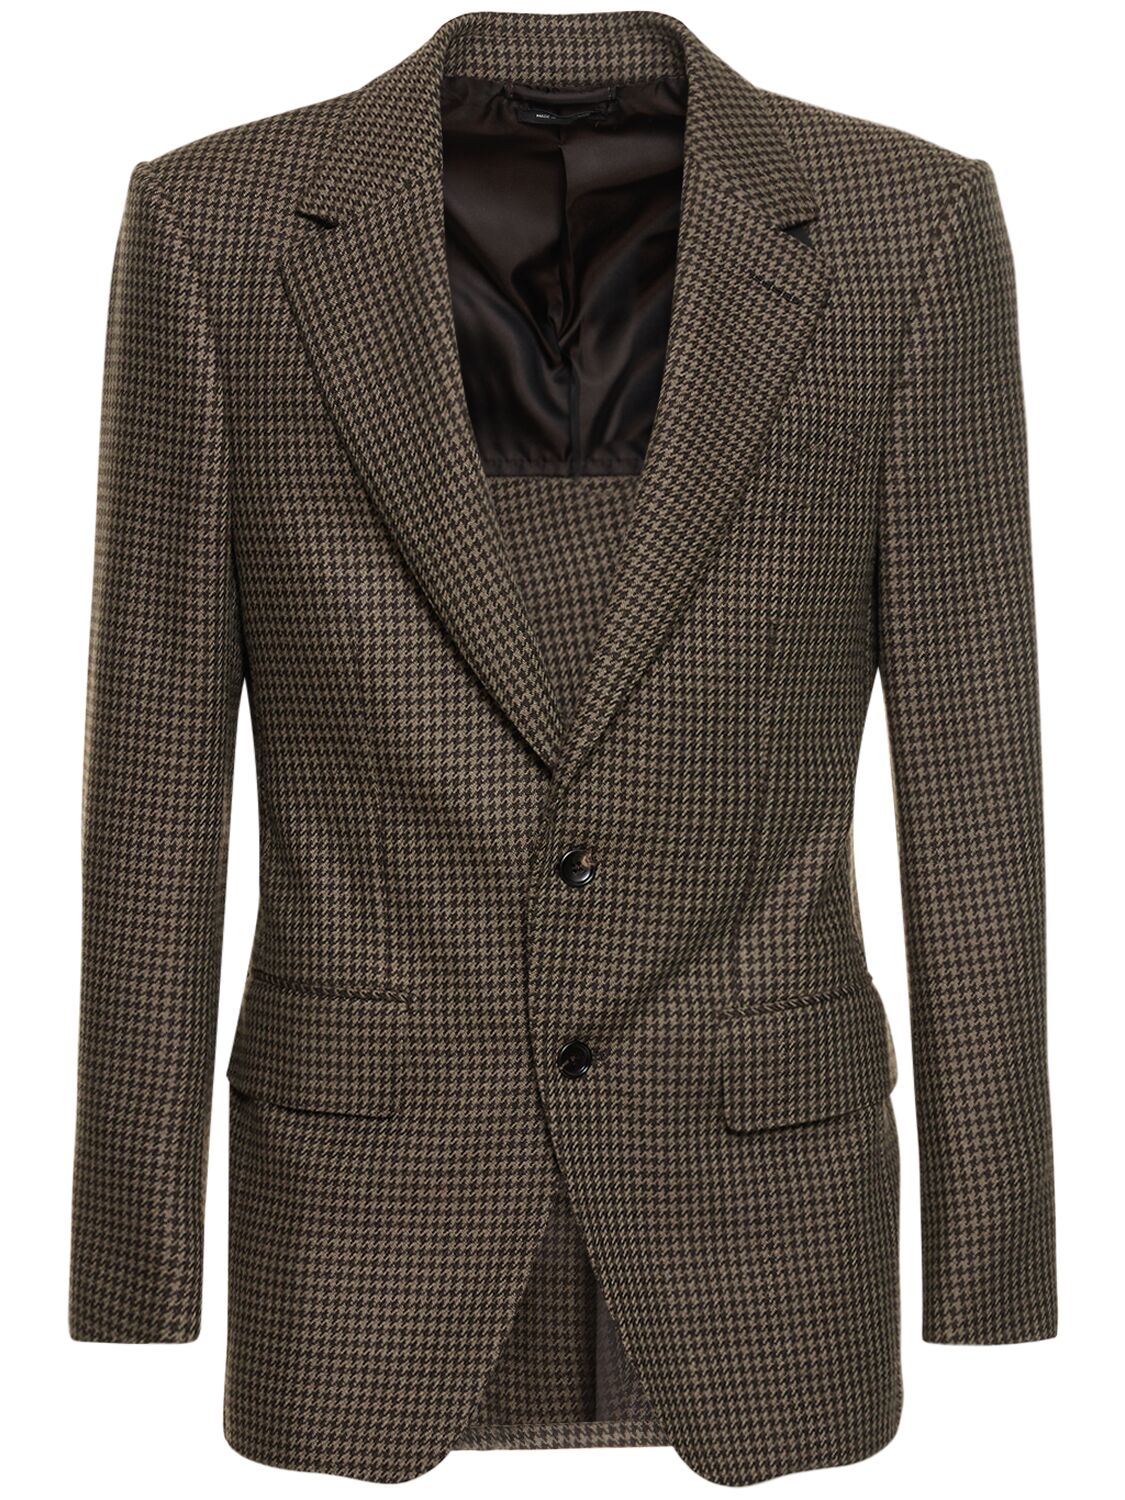 Image of Atticus Wool Houndstooth Jacket